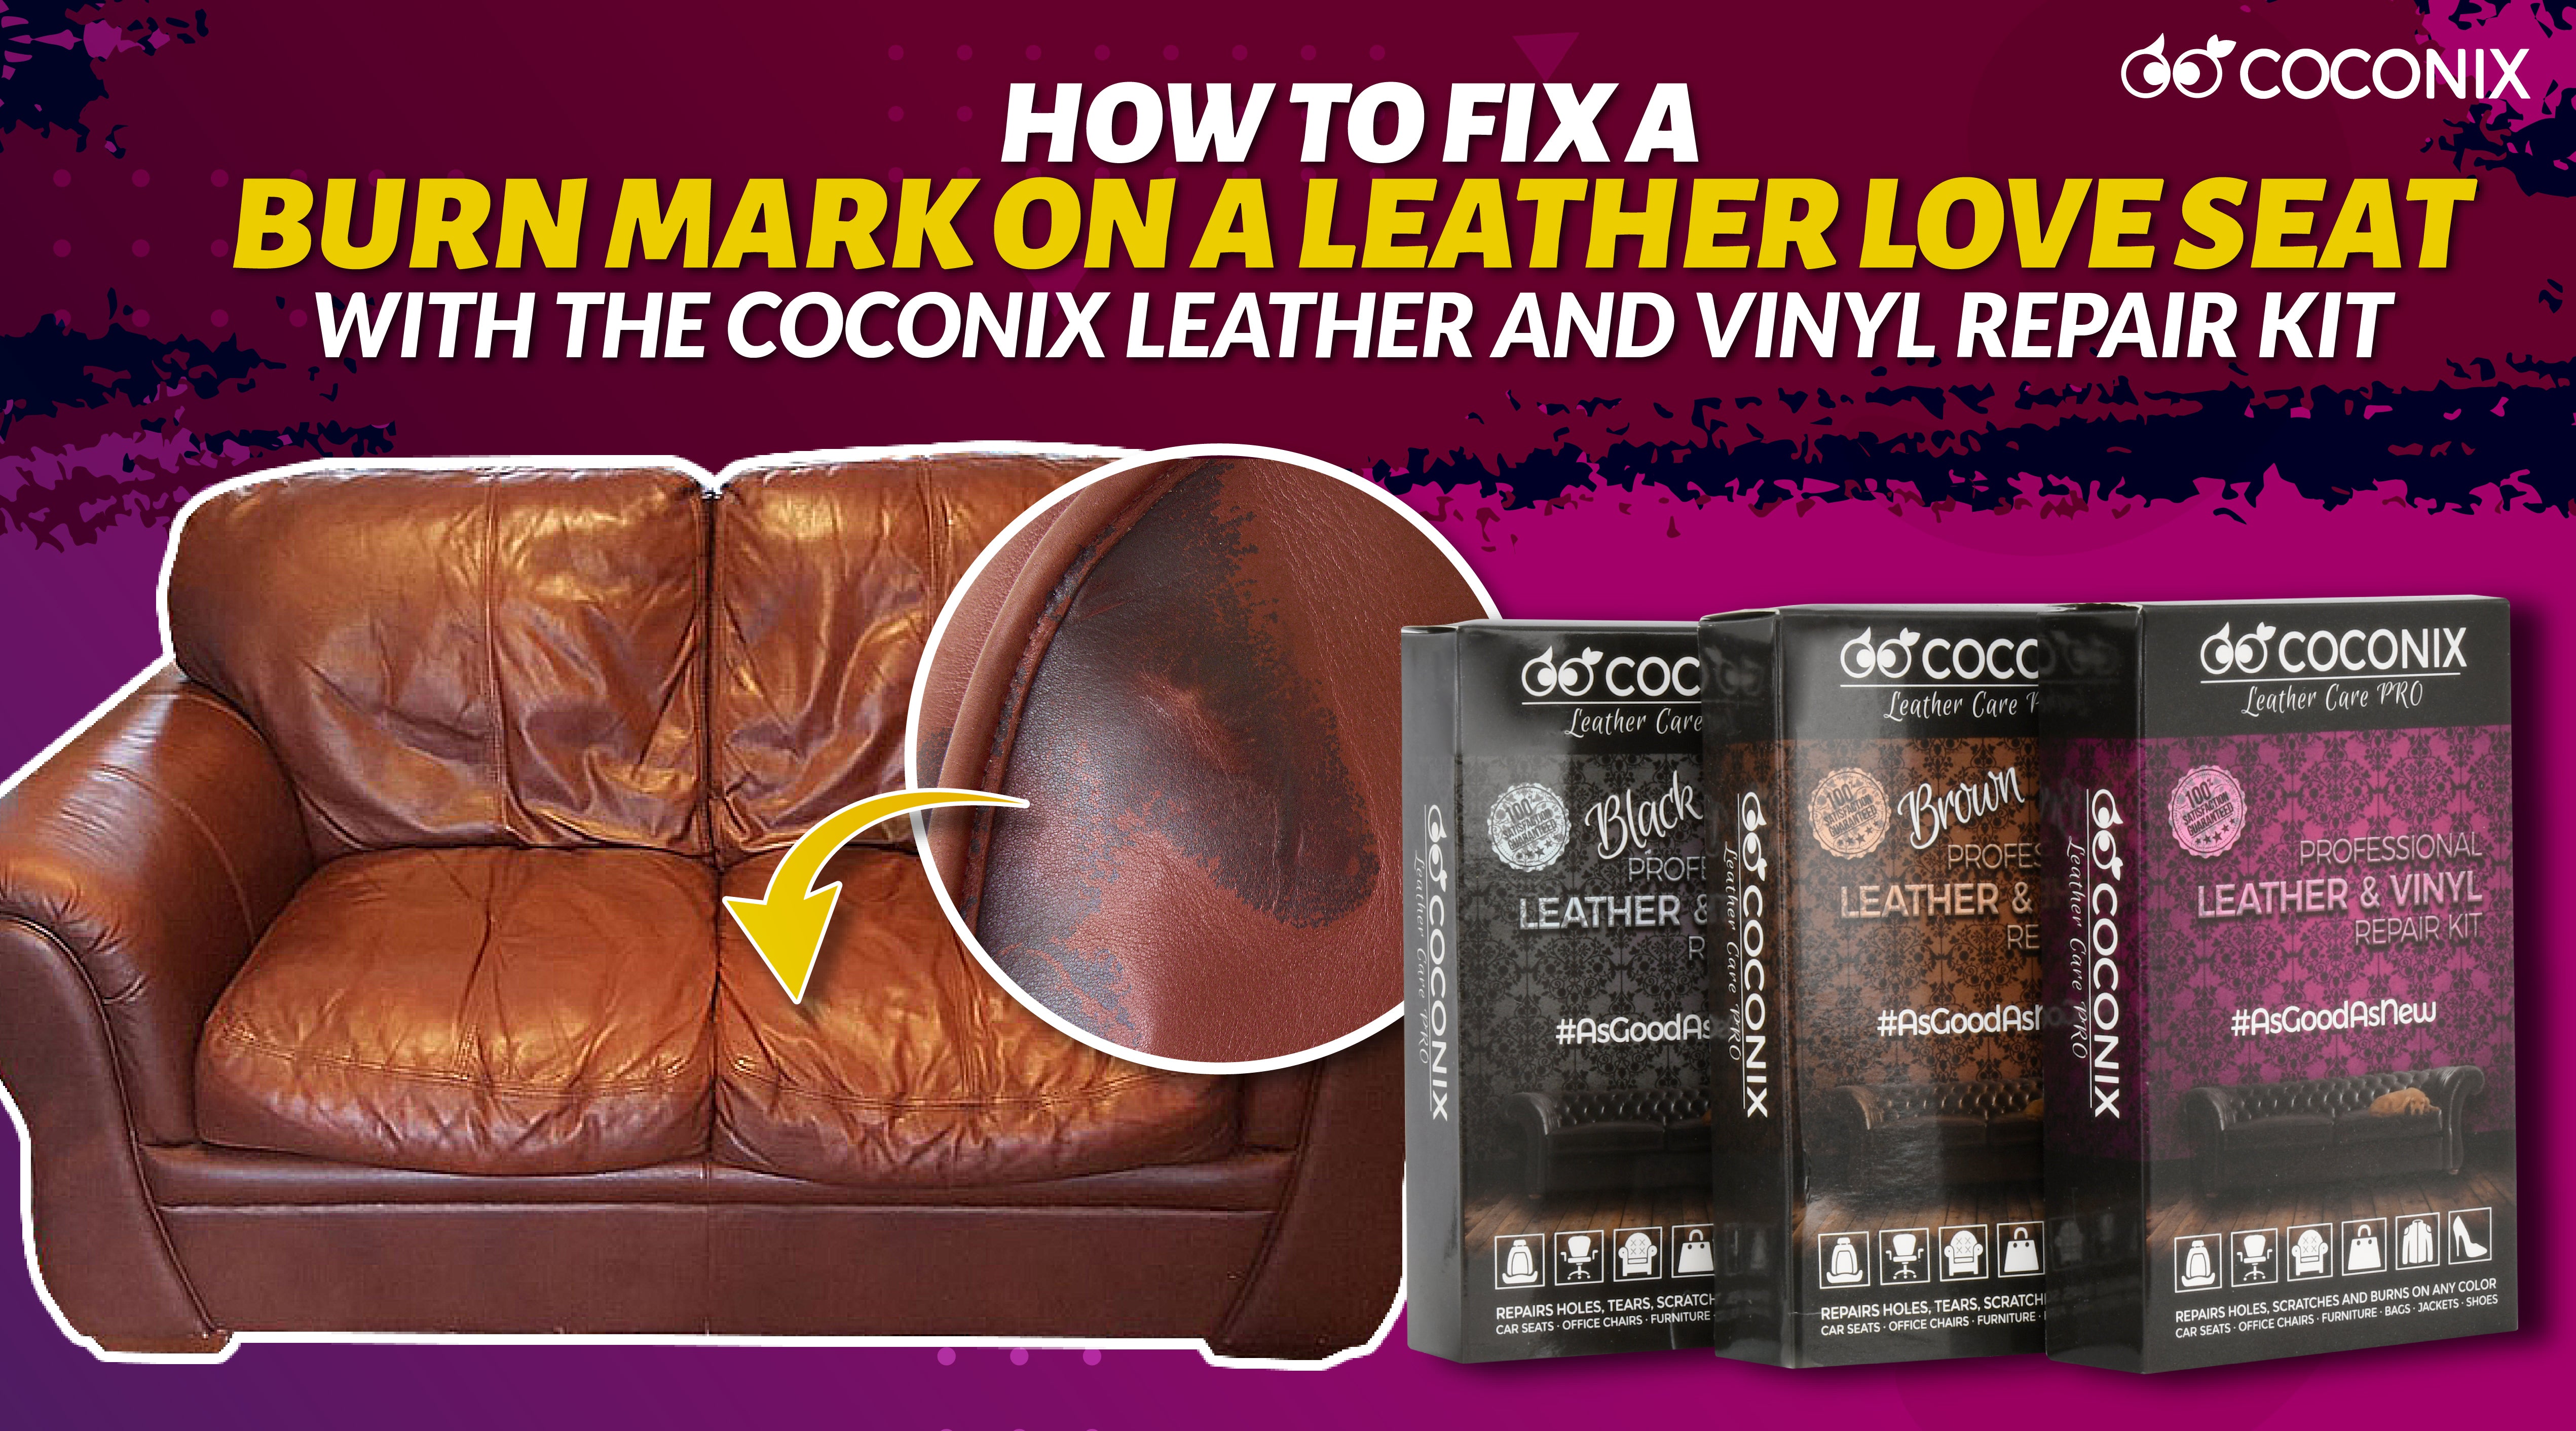 Repair burns and holes on leather and vinyl with Coconix Leather